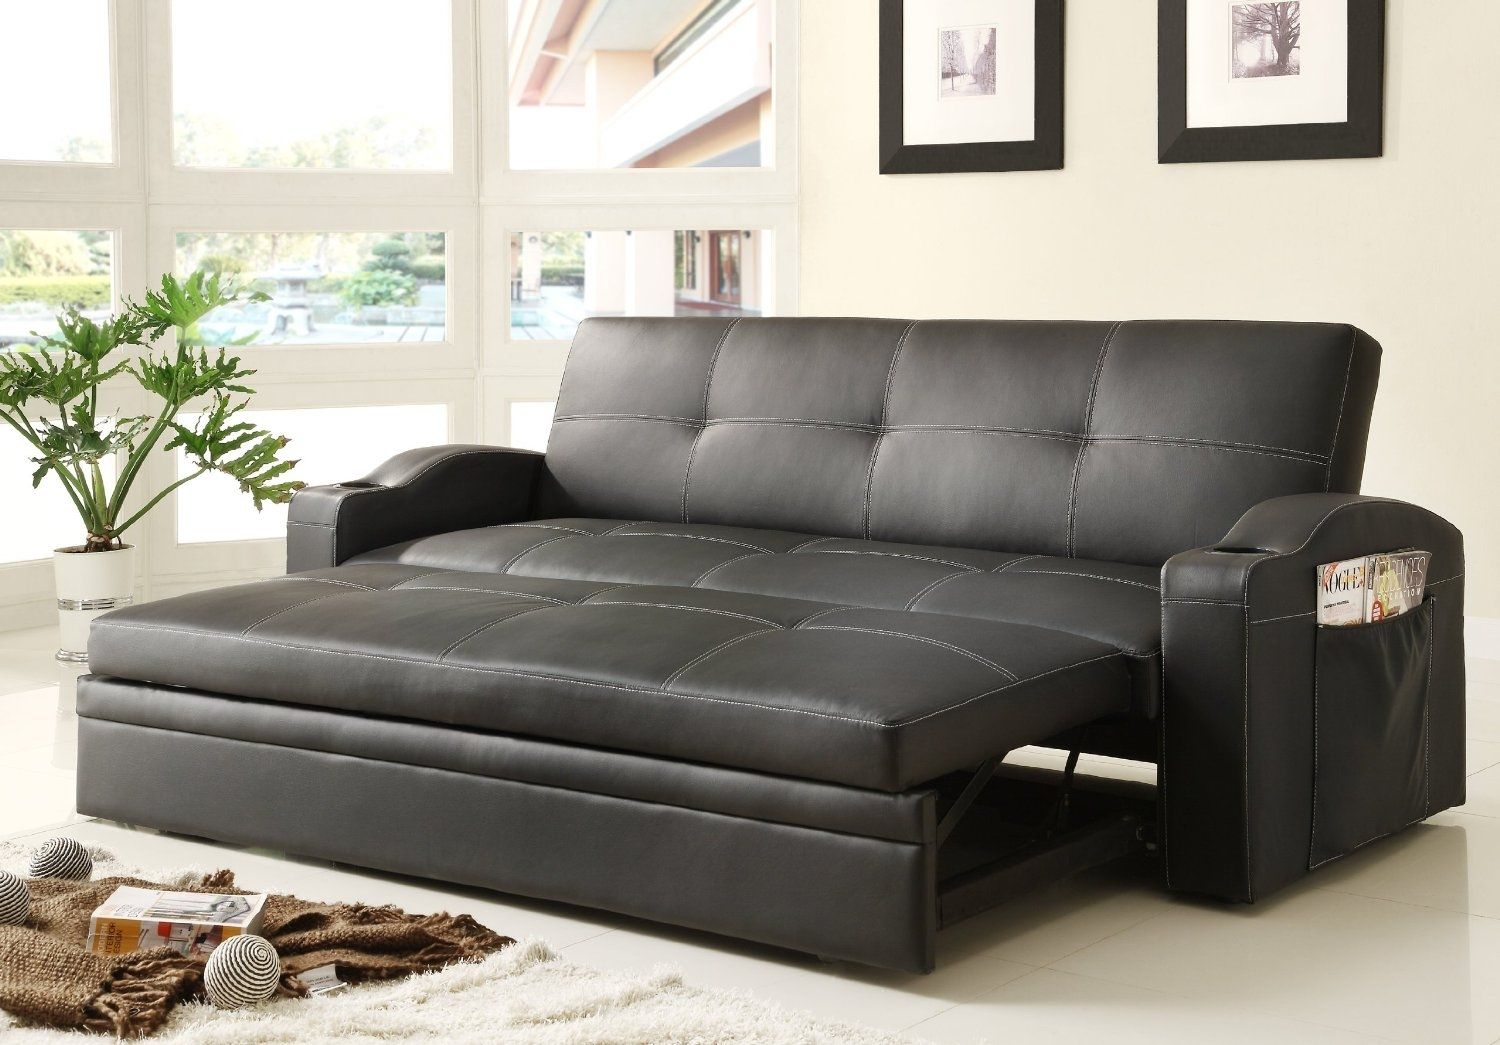 queen size convertible sofa leather sleeper